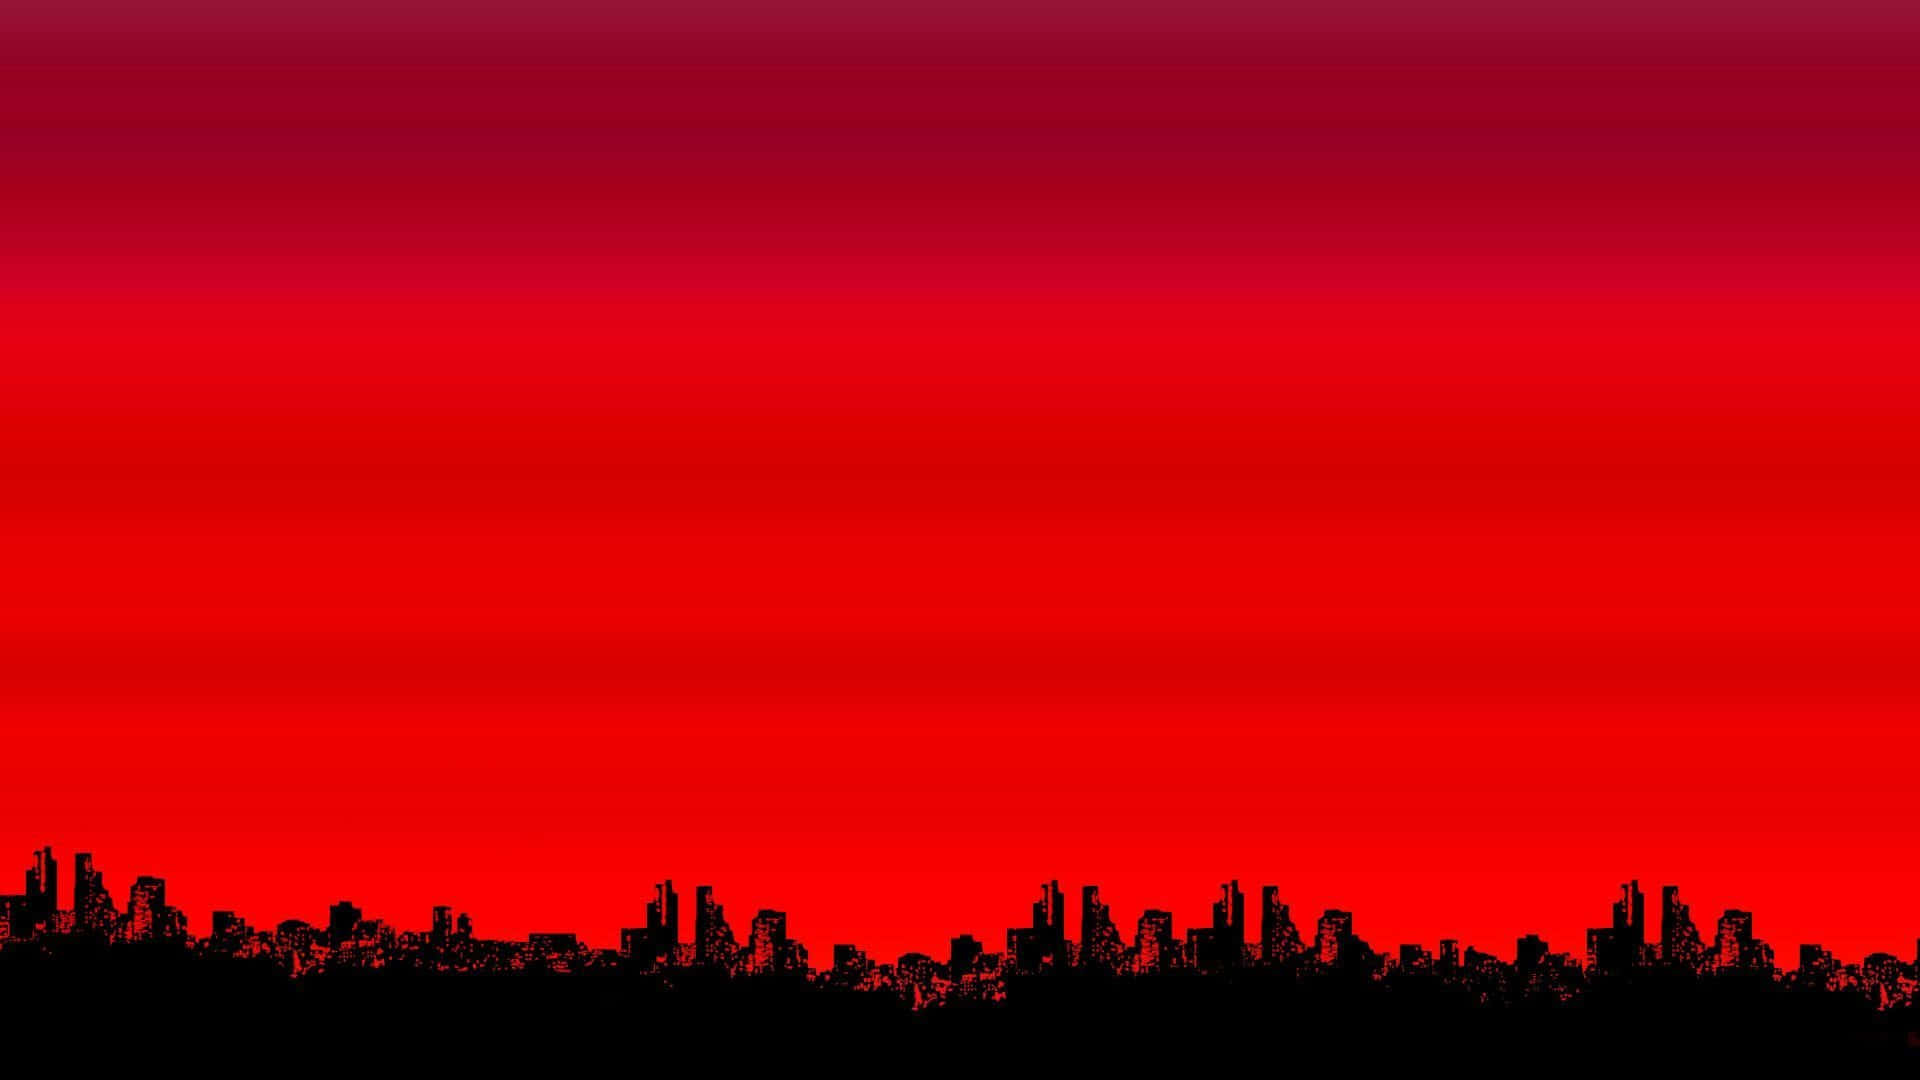 A Red Sky With A City In The Background Wallpaper